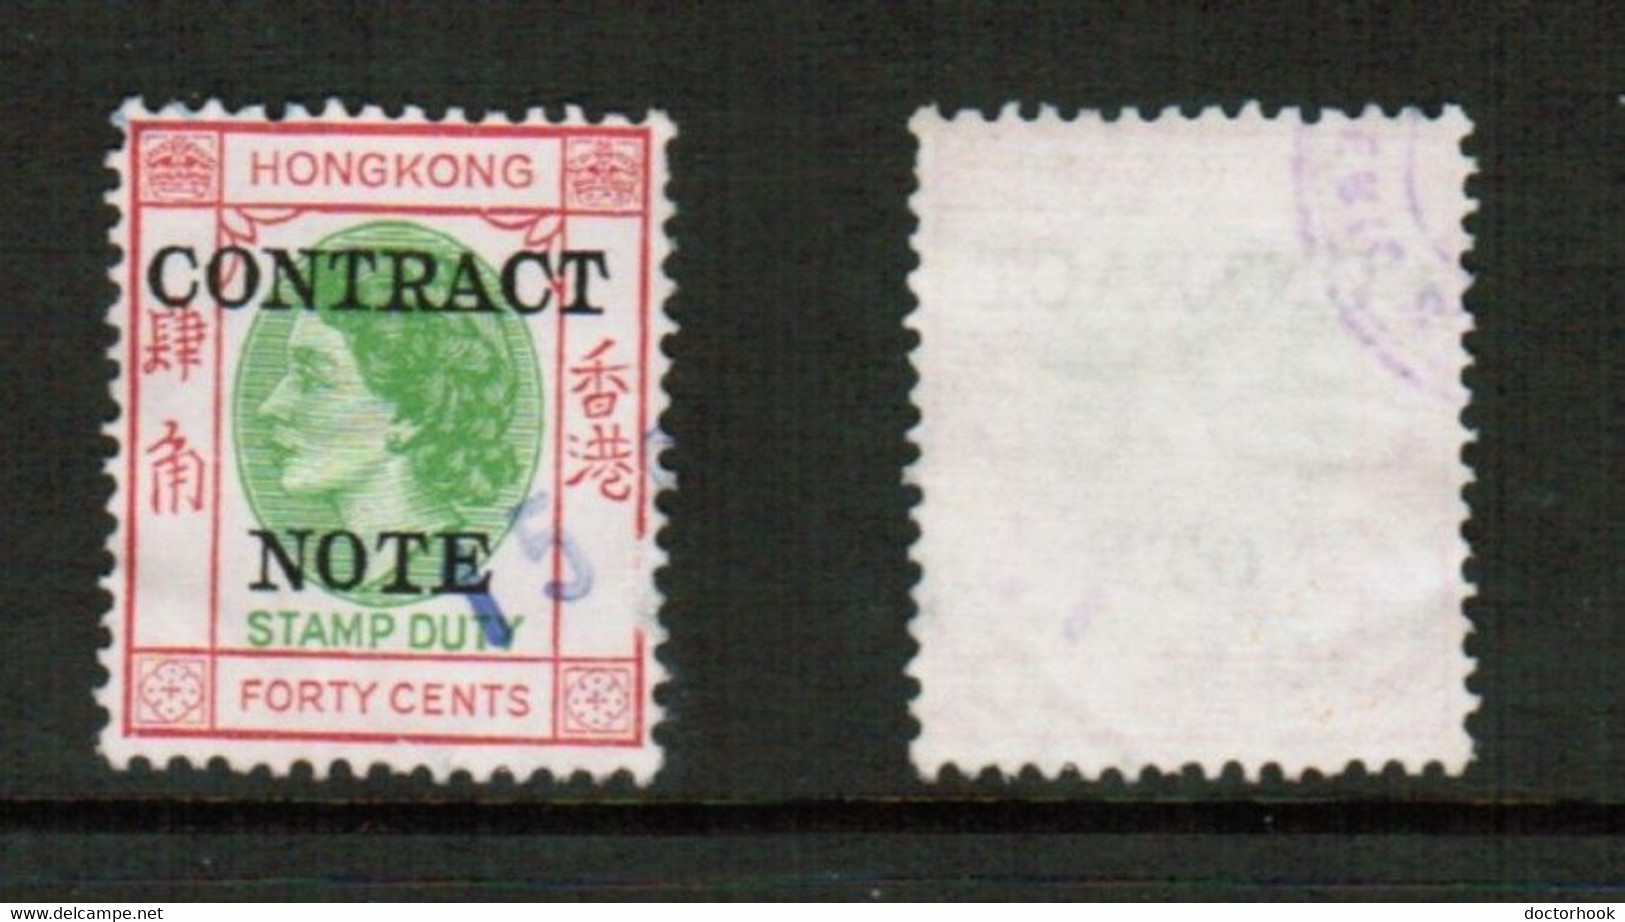 HONG KONG   40 CENT CONTRACT NOTE FISCAL USED THIN (CONDITION AS PER SCAN) (Stamp Scan # 828-10) - Sellos Fiscal-postal